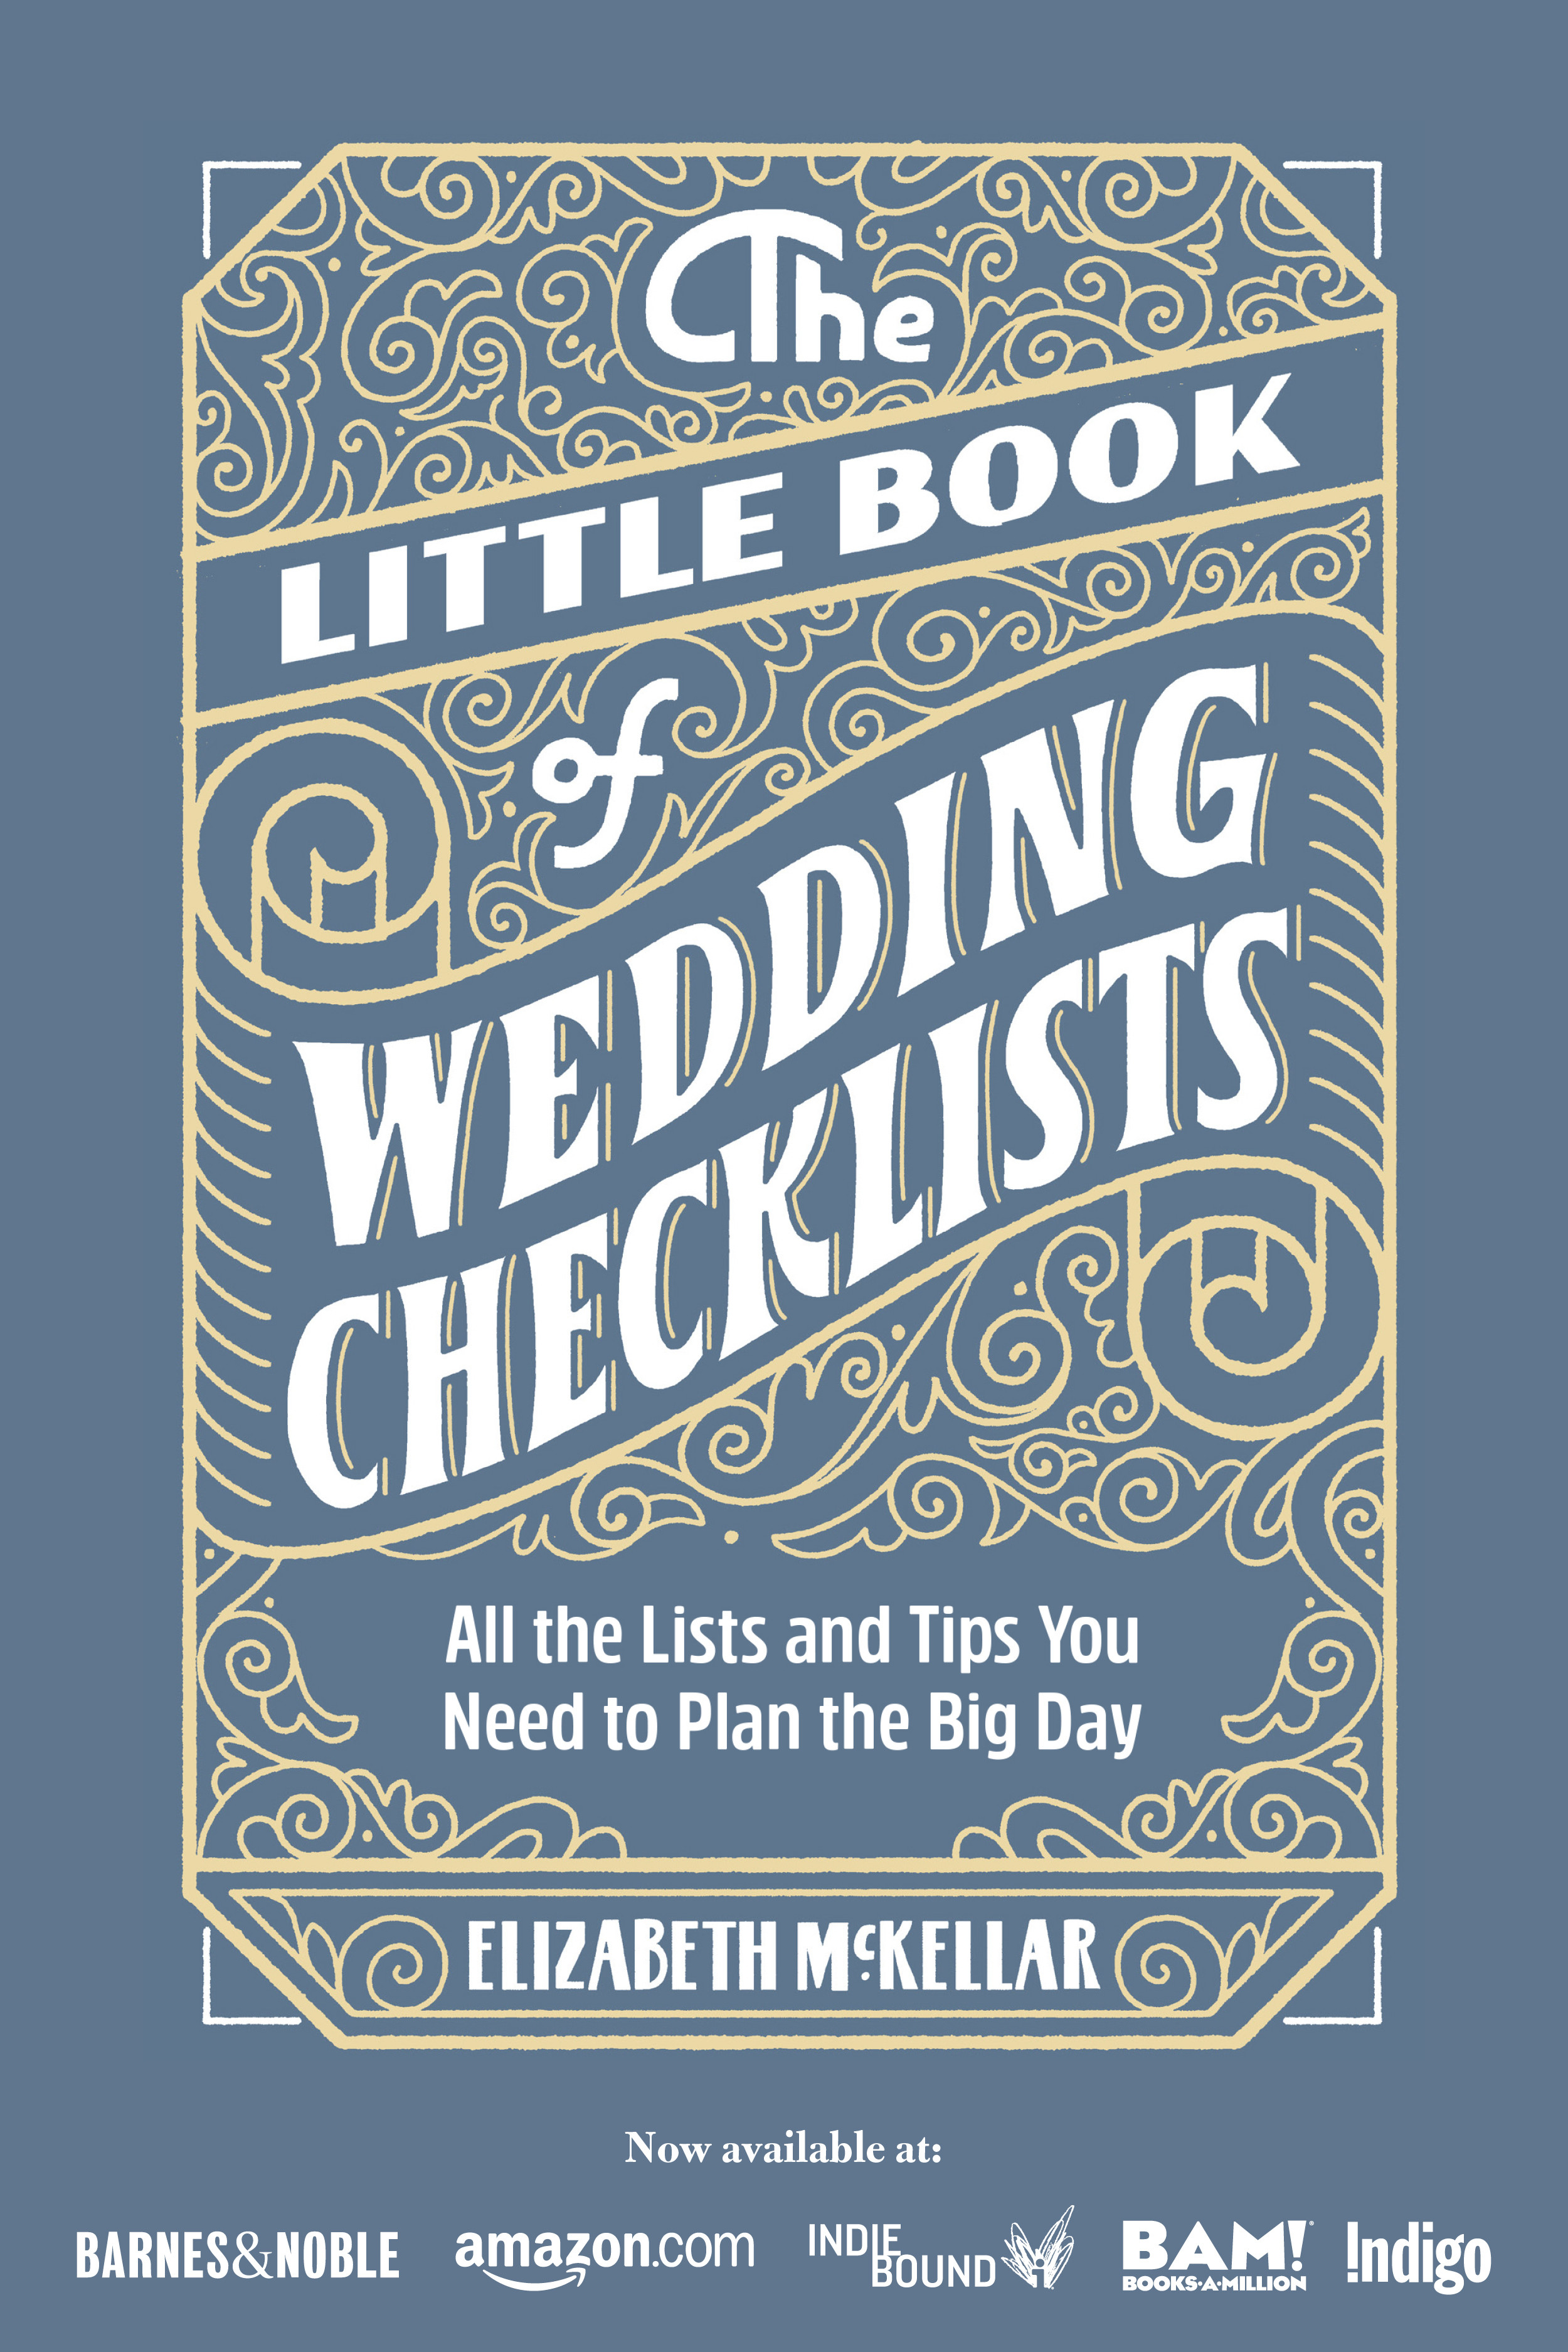 The Little Book of Weddng Checklists: An Expert Guide to Planning Your Wedding